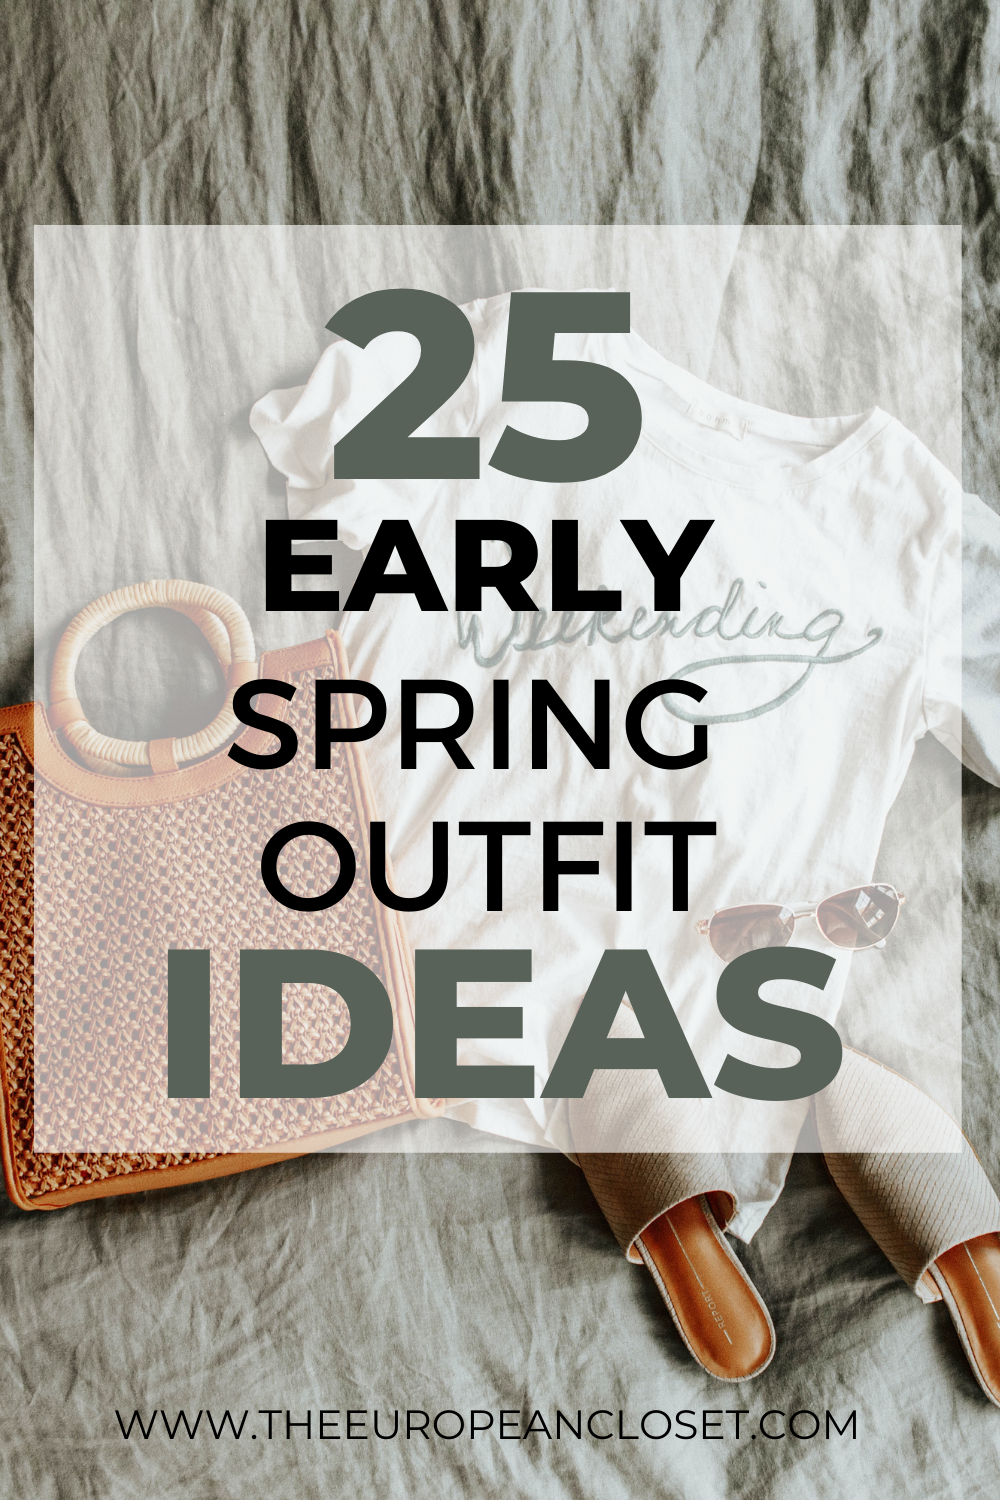 Today, I bring you 25 (you read that right, twenty-five!) early spring outfit ideas. They were created to fi any occasions you might attend.